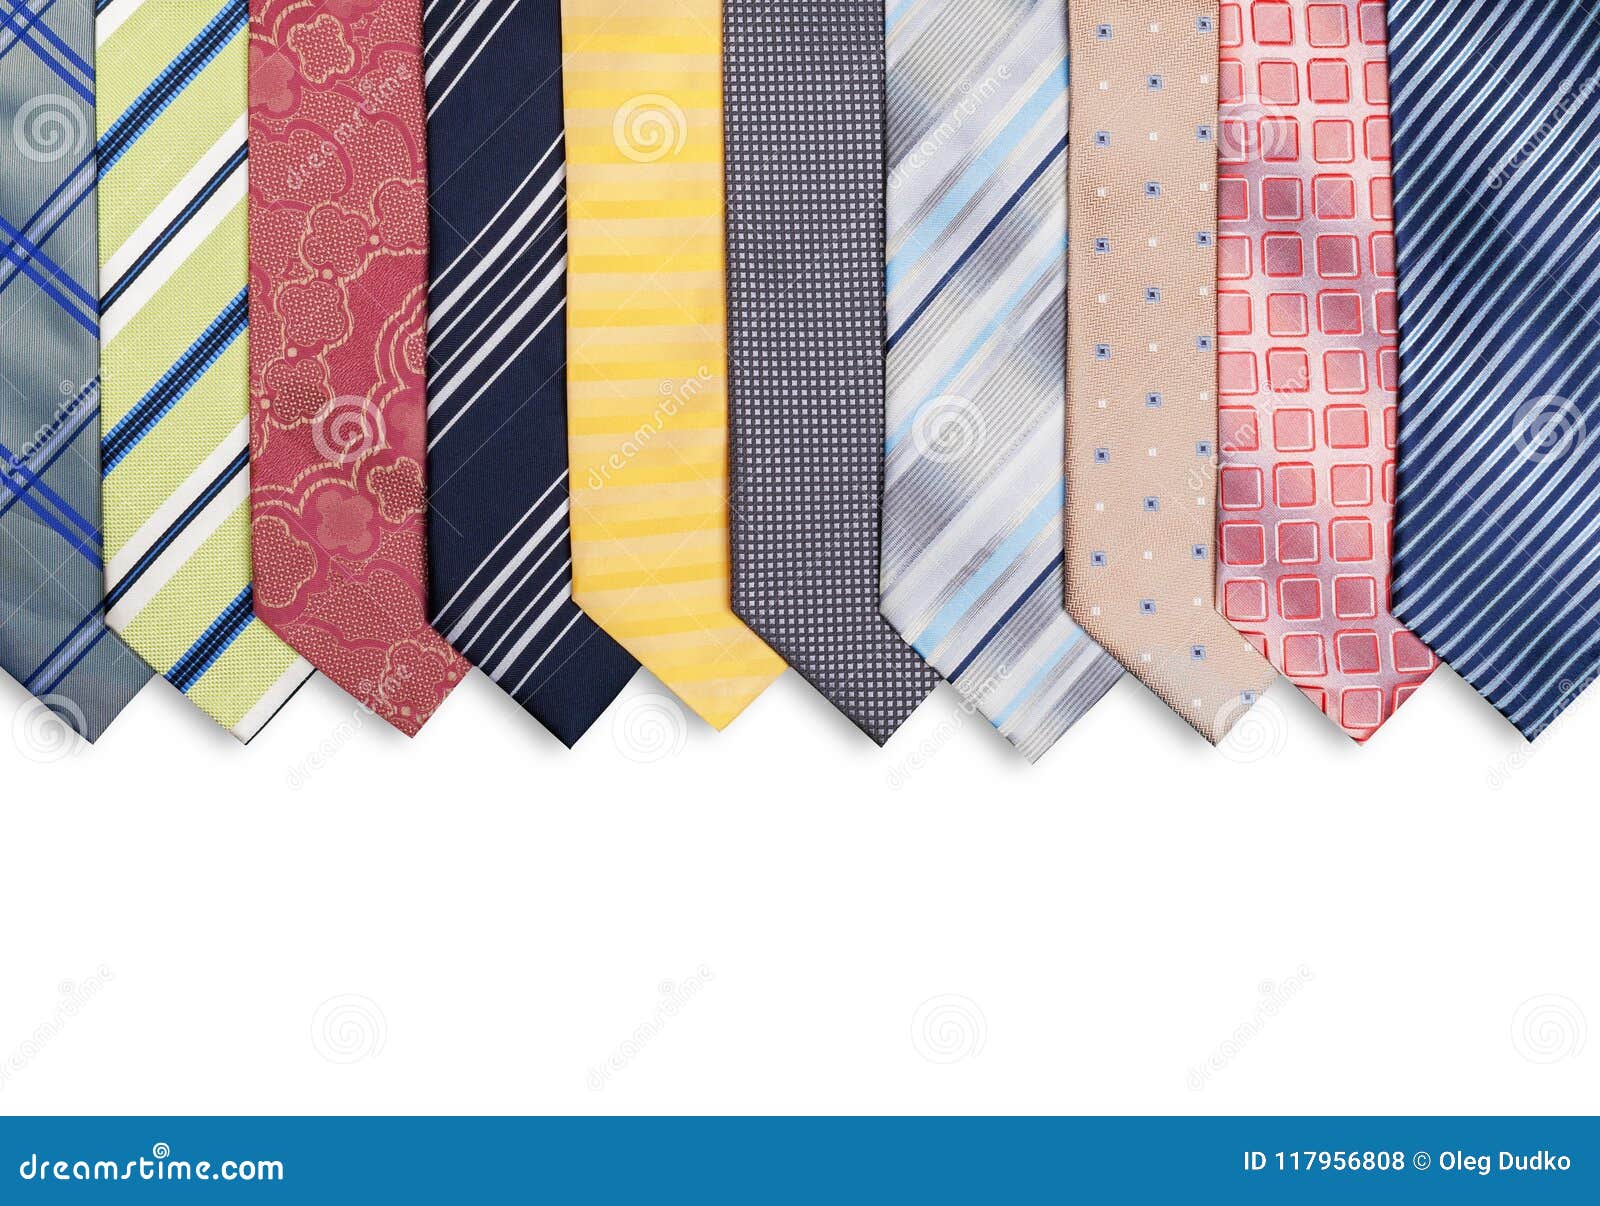 Neckties on White Background Stock Photo - Image of beige, colored ...